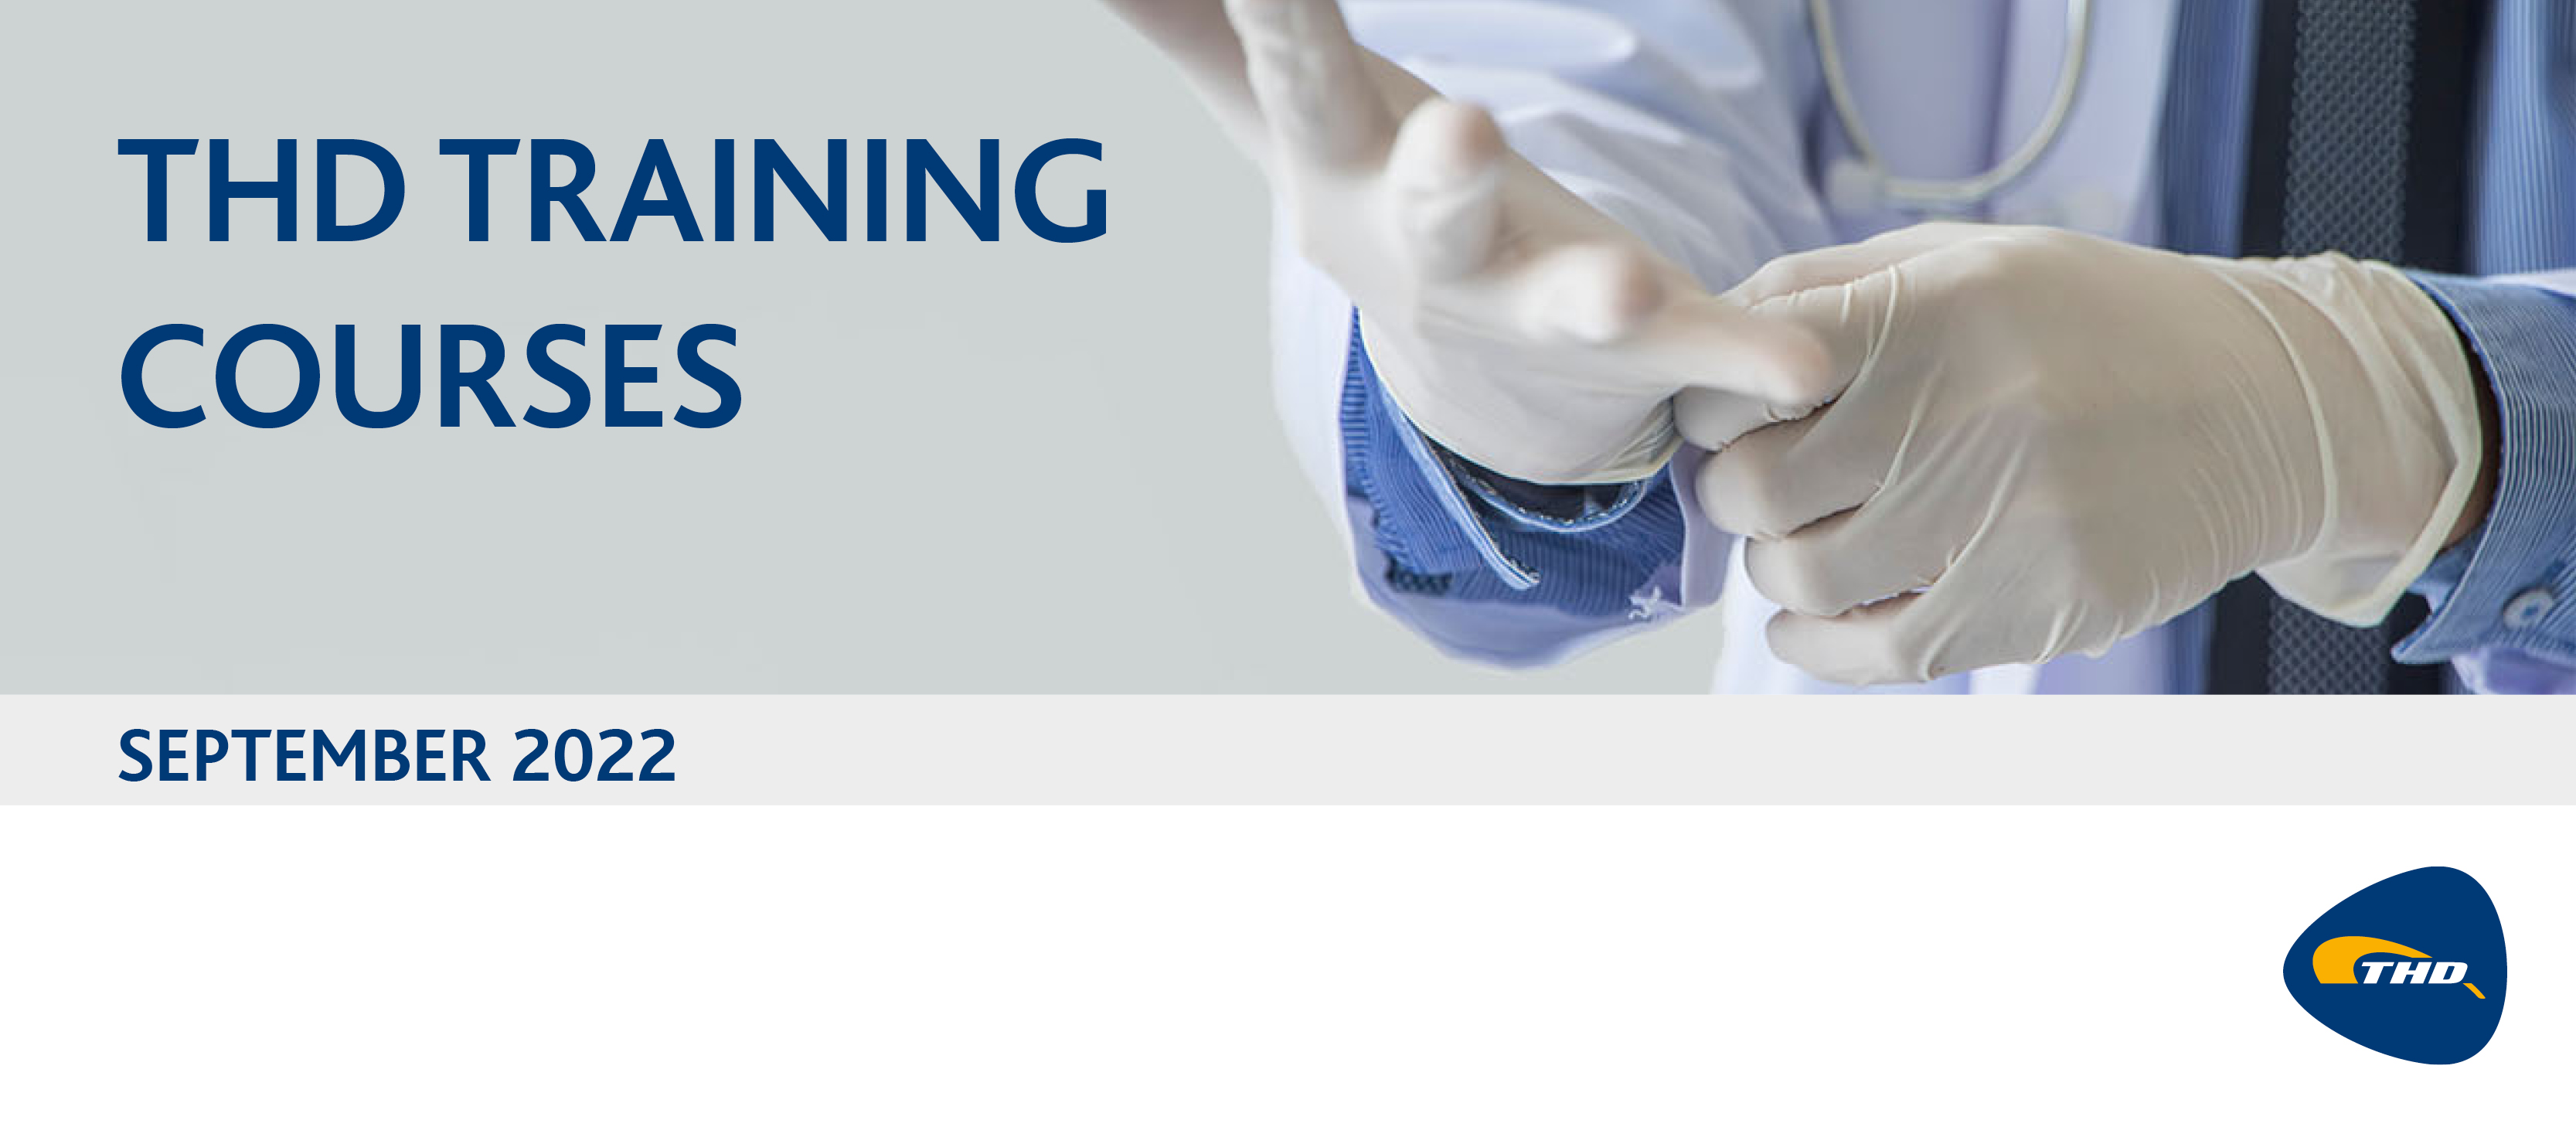 In September THD organized 8 online courses dedicated to different diagnostic and surgical procedures.